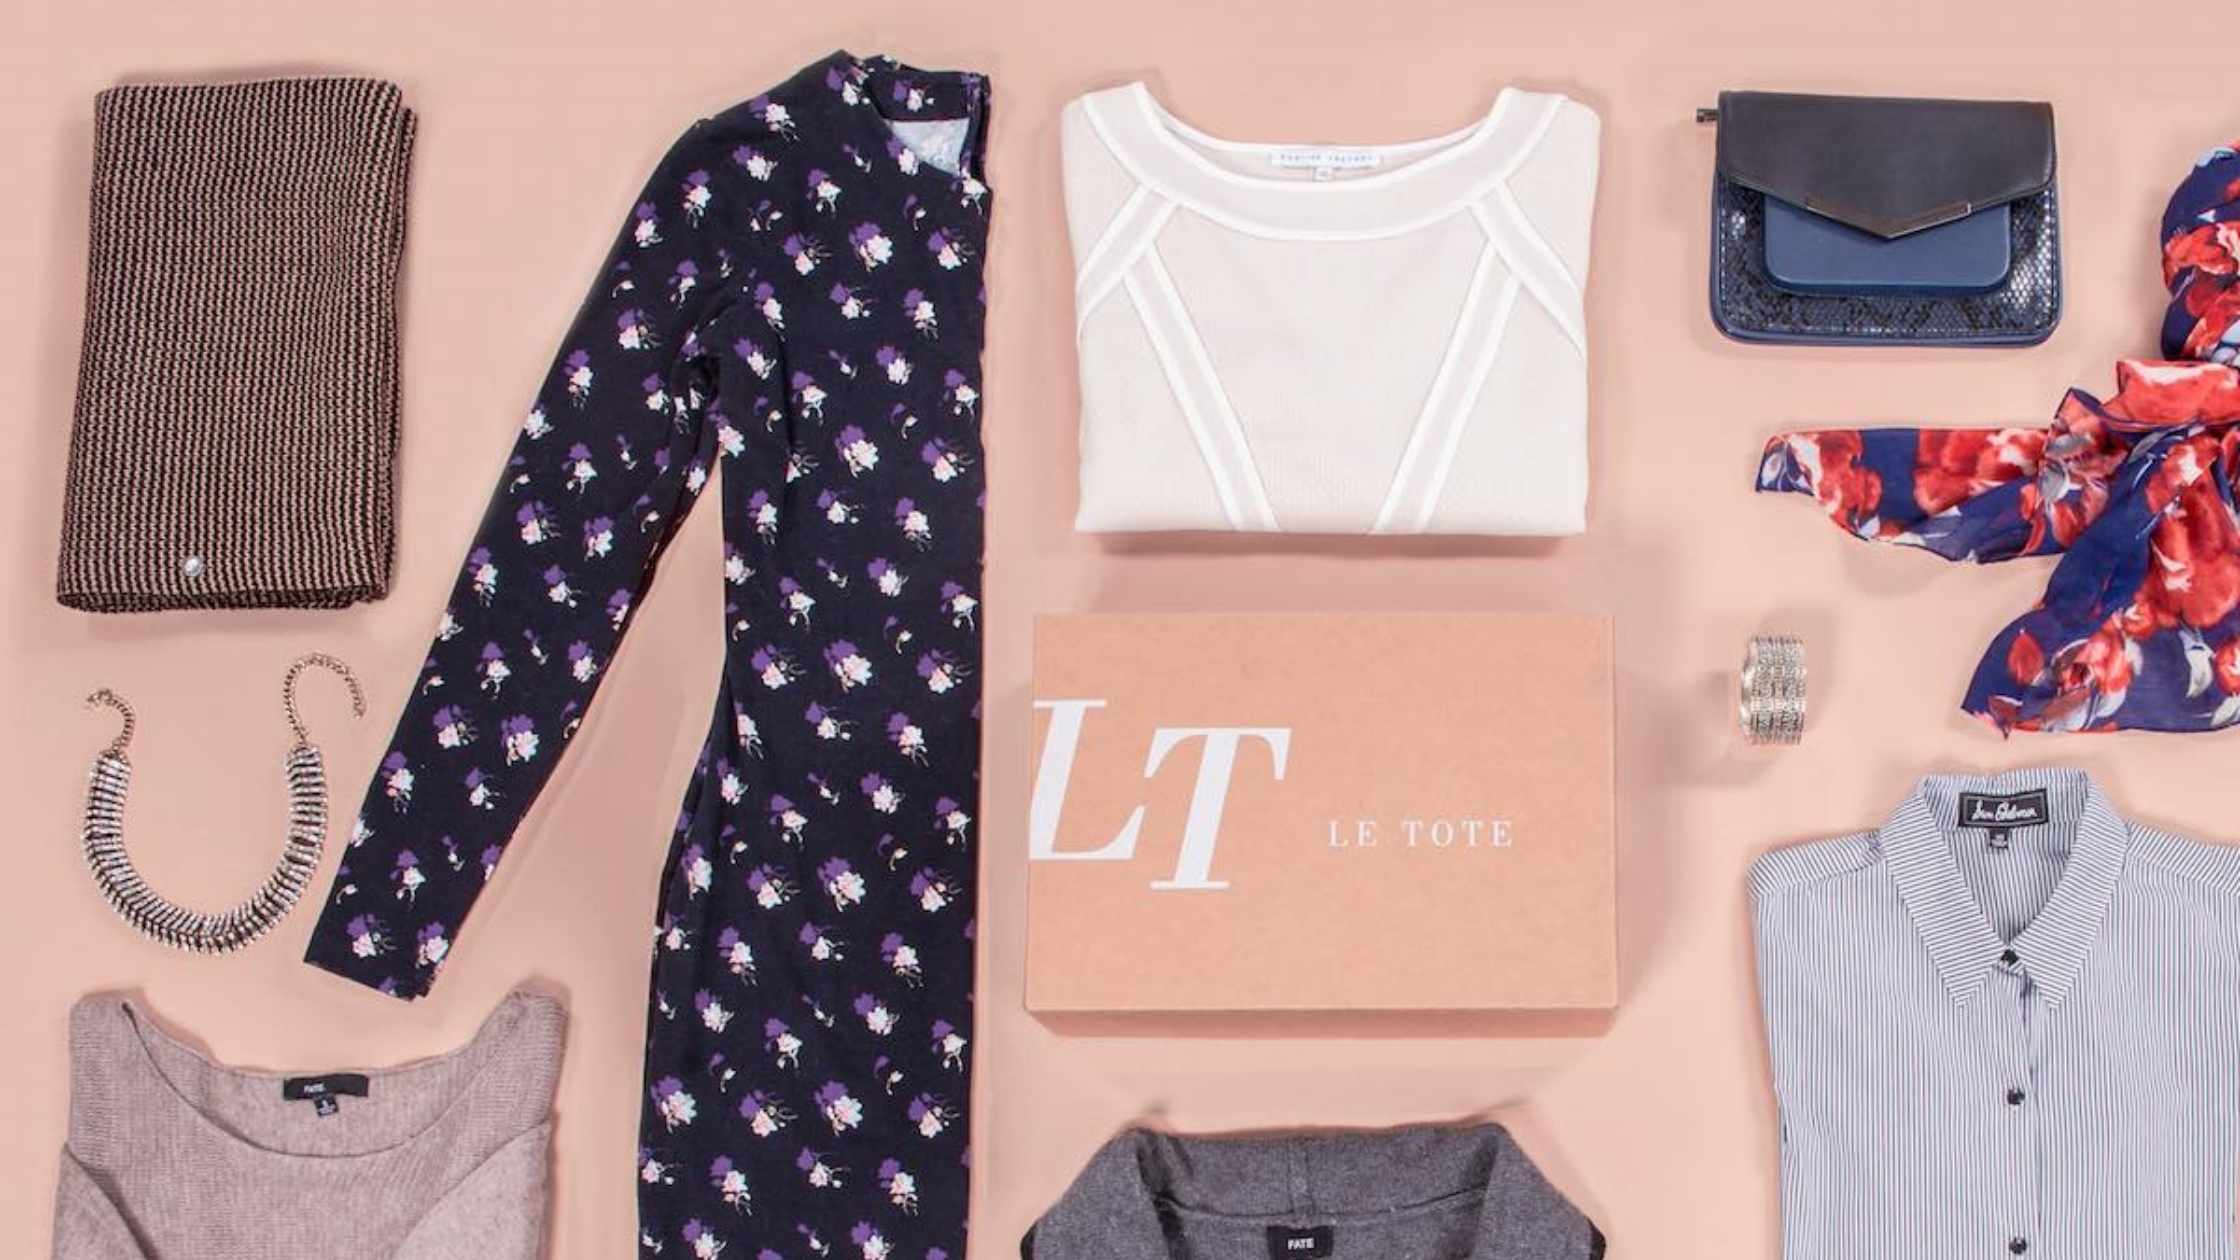 Le Tote Reviews: The Pros and Cons of Renting Outfits